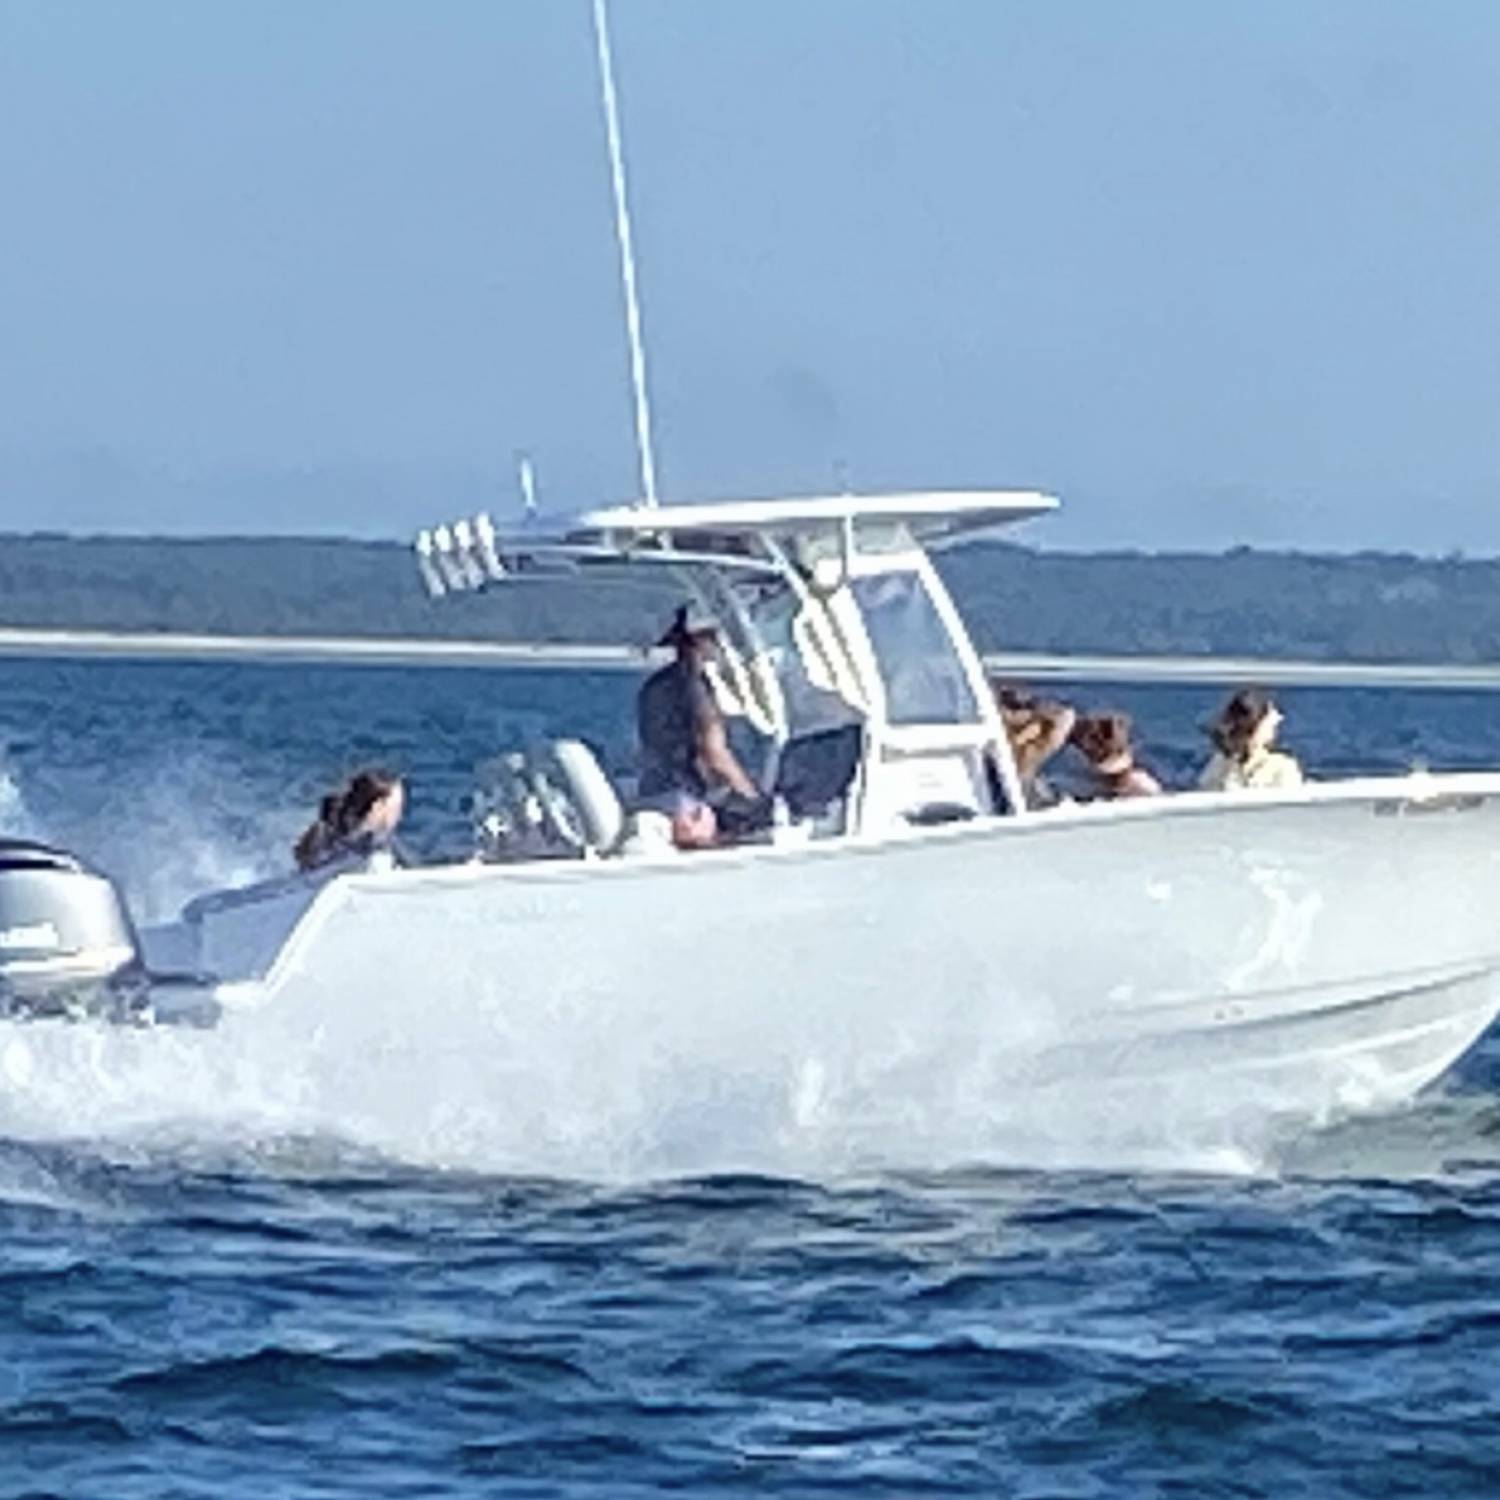 Title: Cruising the Bay - On board their Sportsman Heritage 241 Center Console - Location: Cape Cod Bay. Participating in the Photo Contest #SportsmanApril